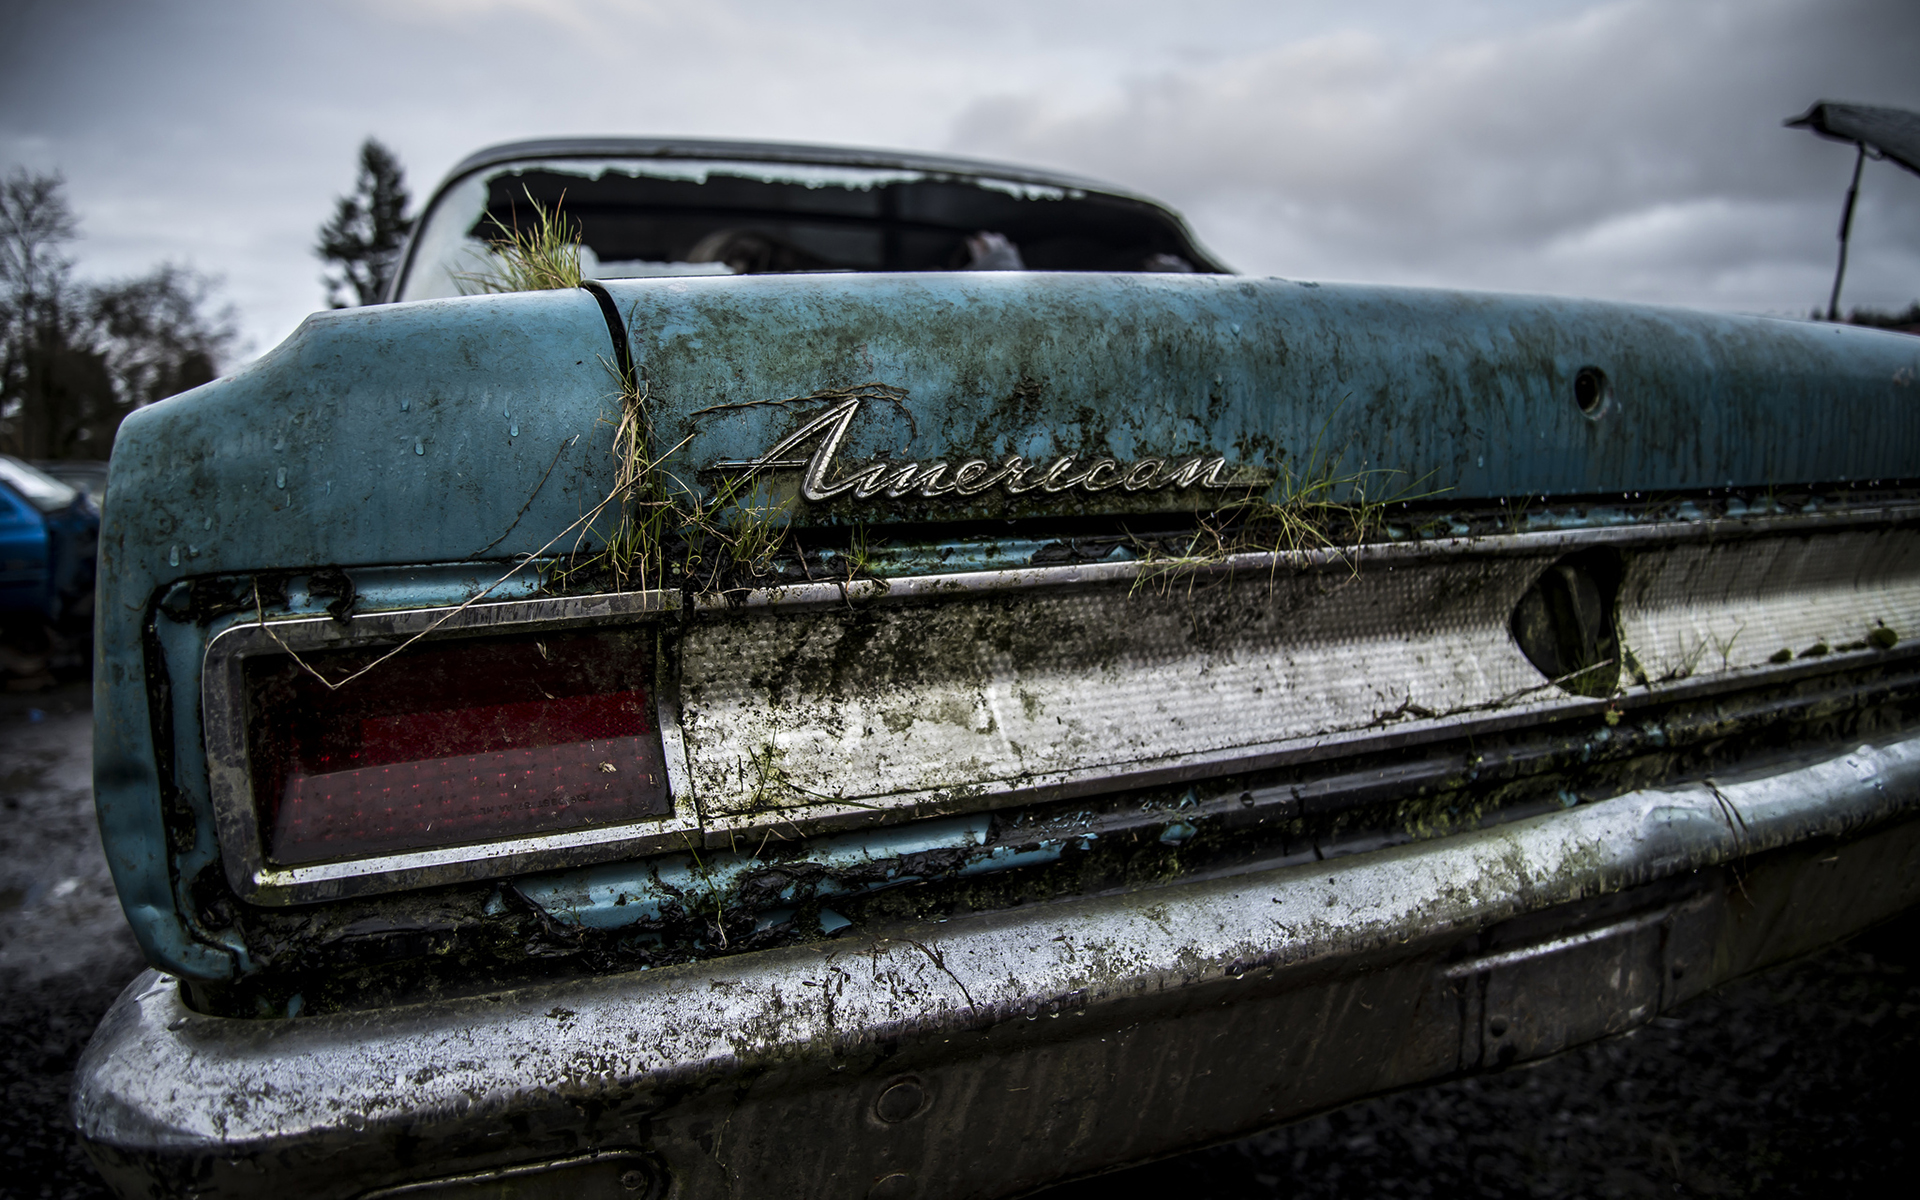 american, Classic, Car, Classic, Overgrowth, Abandon, Deserted, Urban, Decay, Tail, Light, Grass, Dirty Wallpaper